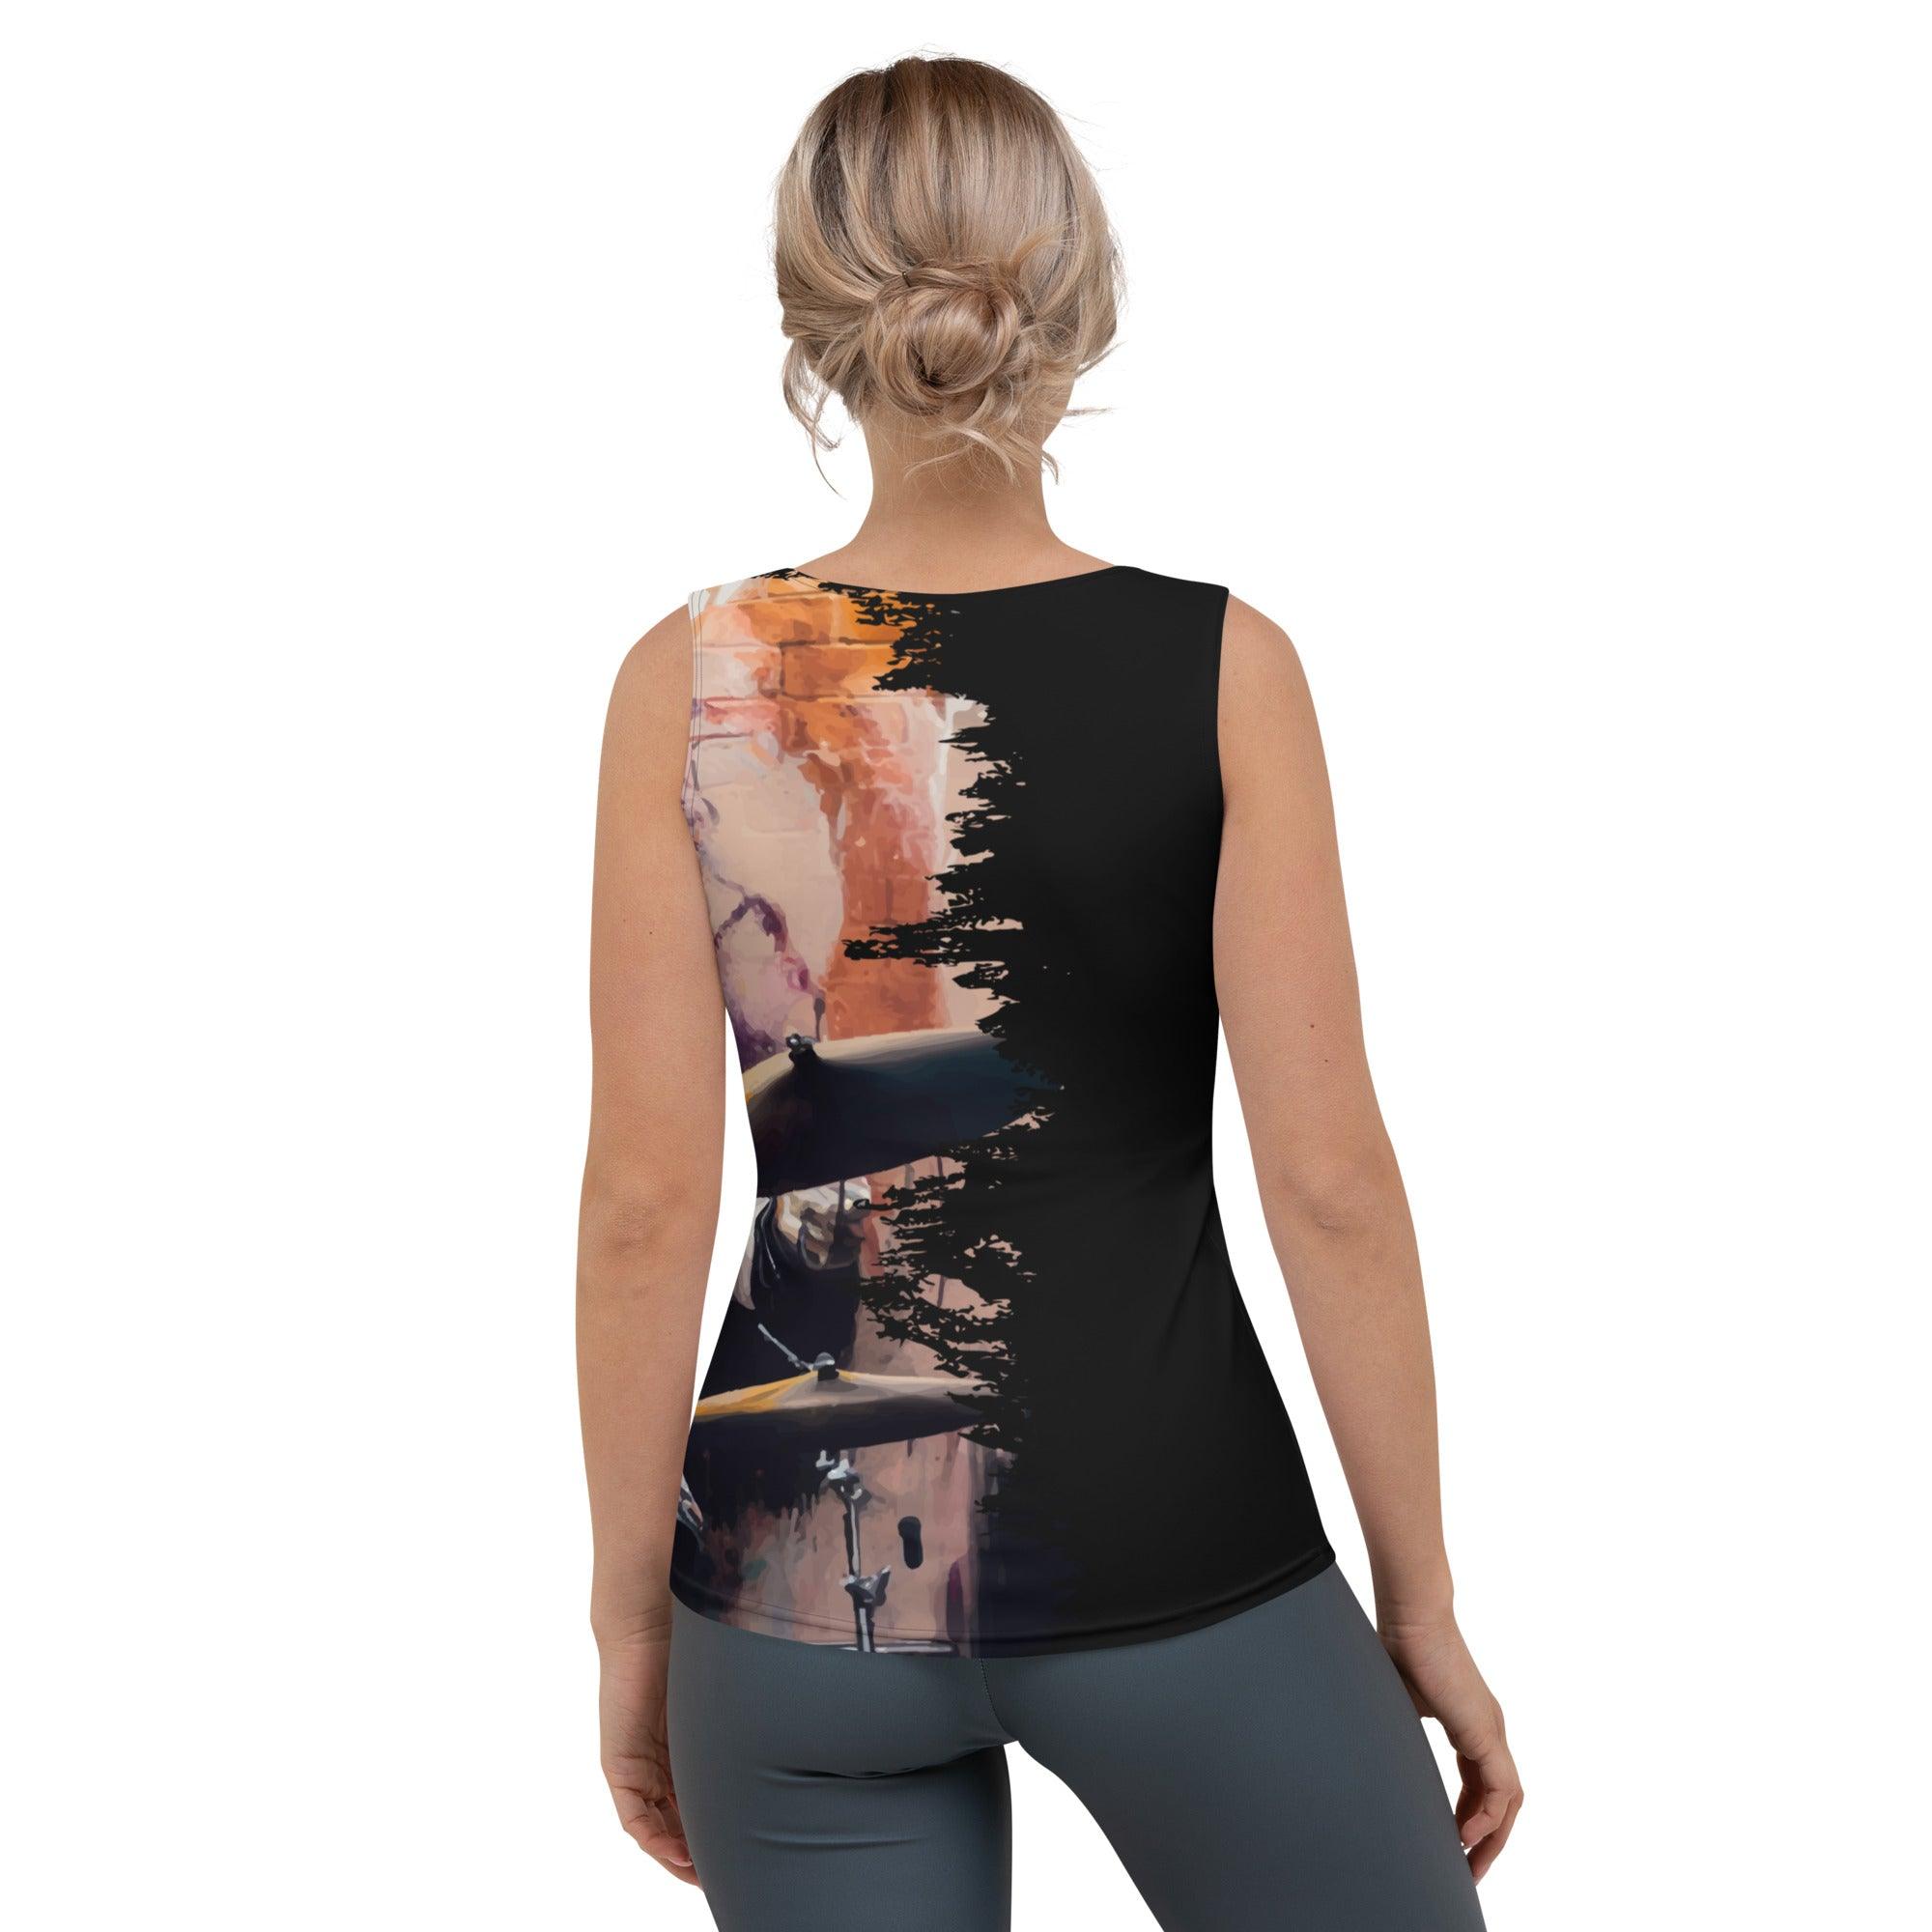 Keeping The Beat Tight Sublimation Cut & Sew Tank Top - Beyond T-shirts